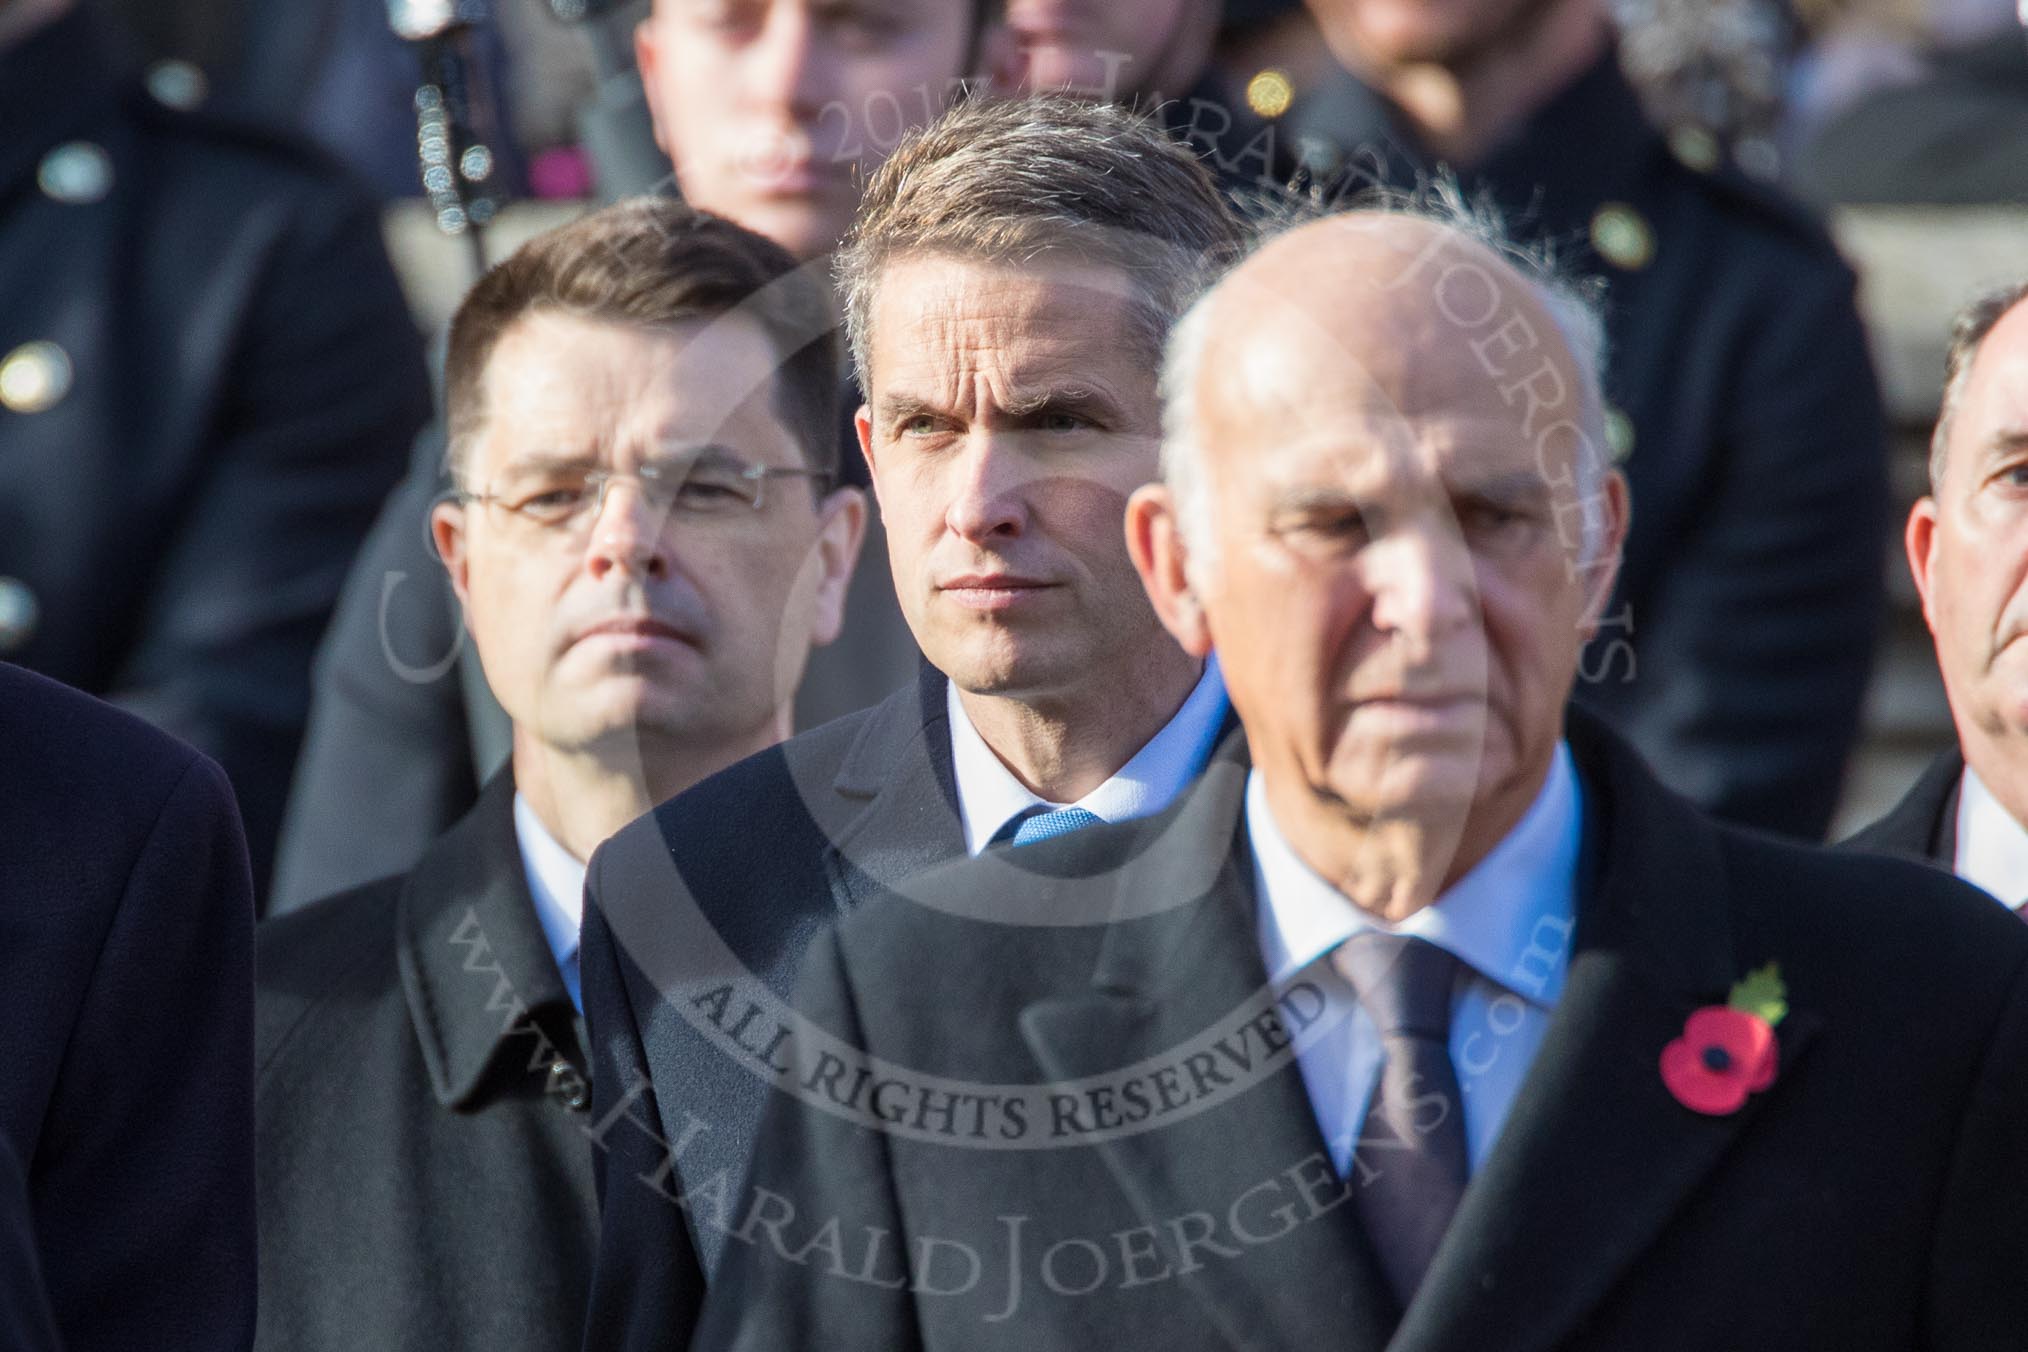 The Rt Hon Gavin Williamson CBE MP (Secretary of State for Defence) during the Remembrance Sunday Cenotaph Ceremony 2018 at Horse Guards Parade, Westminster, London, 11 November 2018, 10:57.